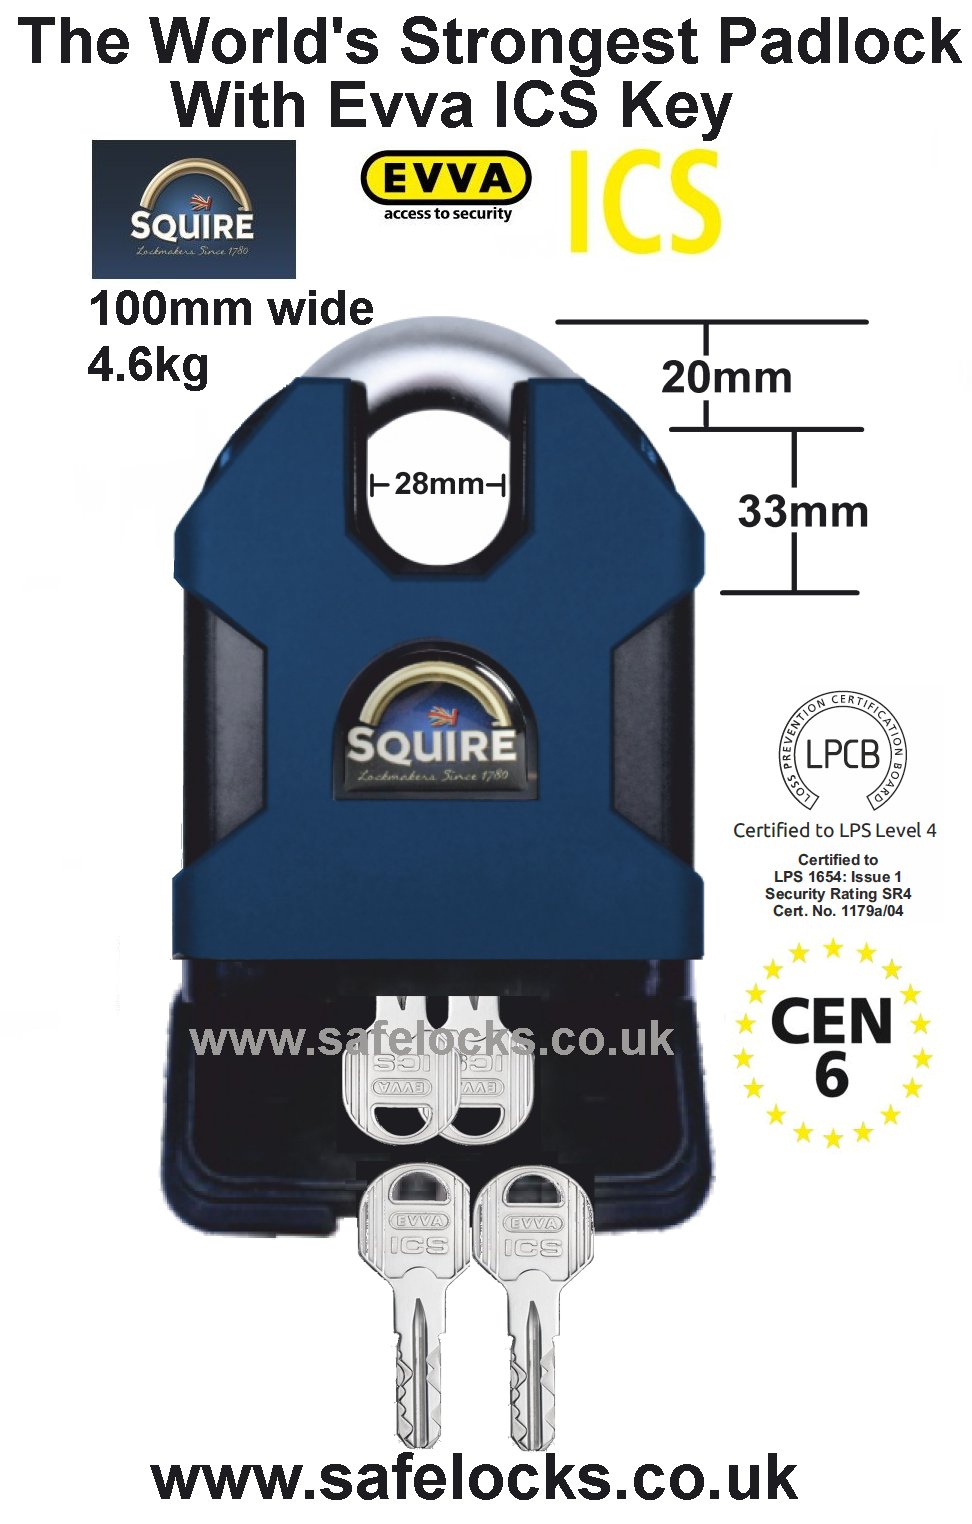 Squire SS100CS dual key LPCB Level SR4 CEN 6 rated  padlockwith high security Evva ICS patented key 